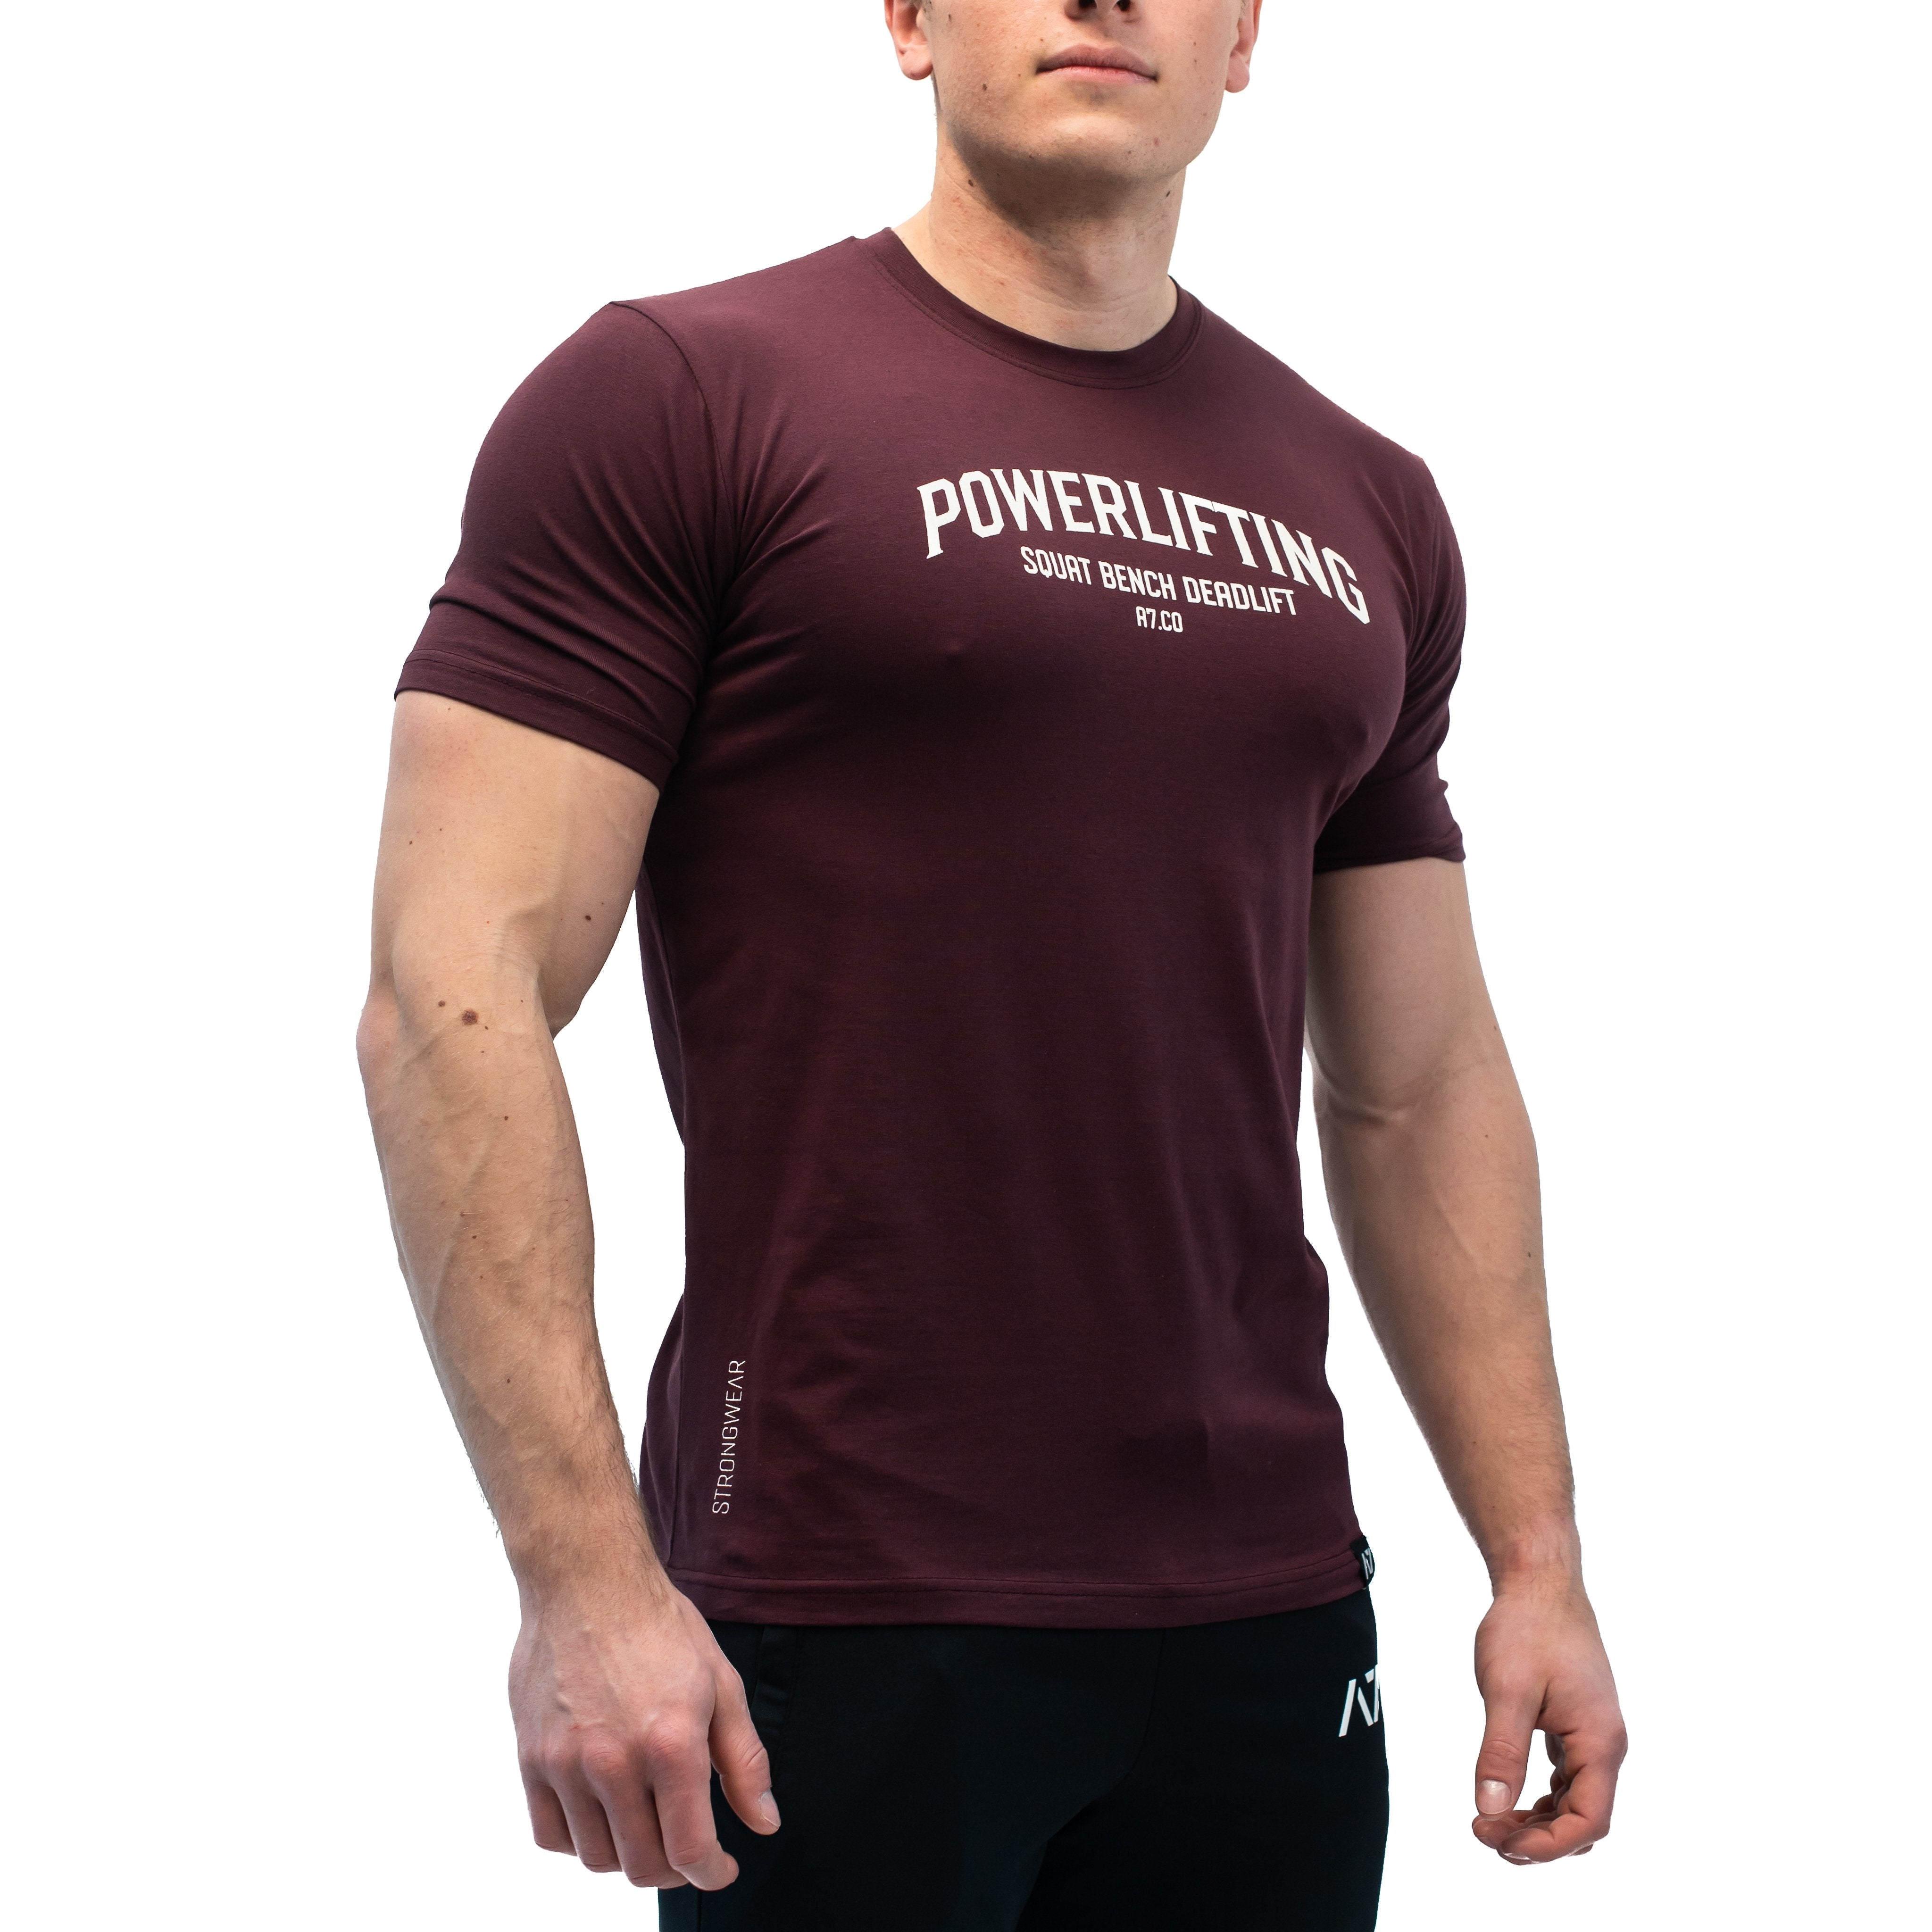  Powerliting Mahogany Bar Grip T-shirt, great as a squat shirt. Purchase  Powerliting Mahogany  Bar Grip tshirt UK from A7 UK. Purchase  Powerliting Mahogany Bar Grip Shirt Europe from A7 UK. No more chalk and no more sliding. Best Bar Grip Tshirts, shipping to UK and Europe from A7 UK. Stealth is our classic black on black shirt design! The best Powerlifting apparel for all your workouts. Available in UK and Europe including France, Italy, Germany, Sweden and Poland